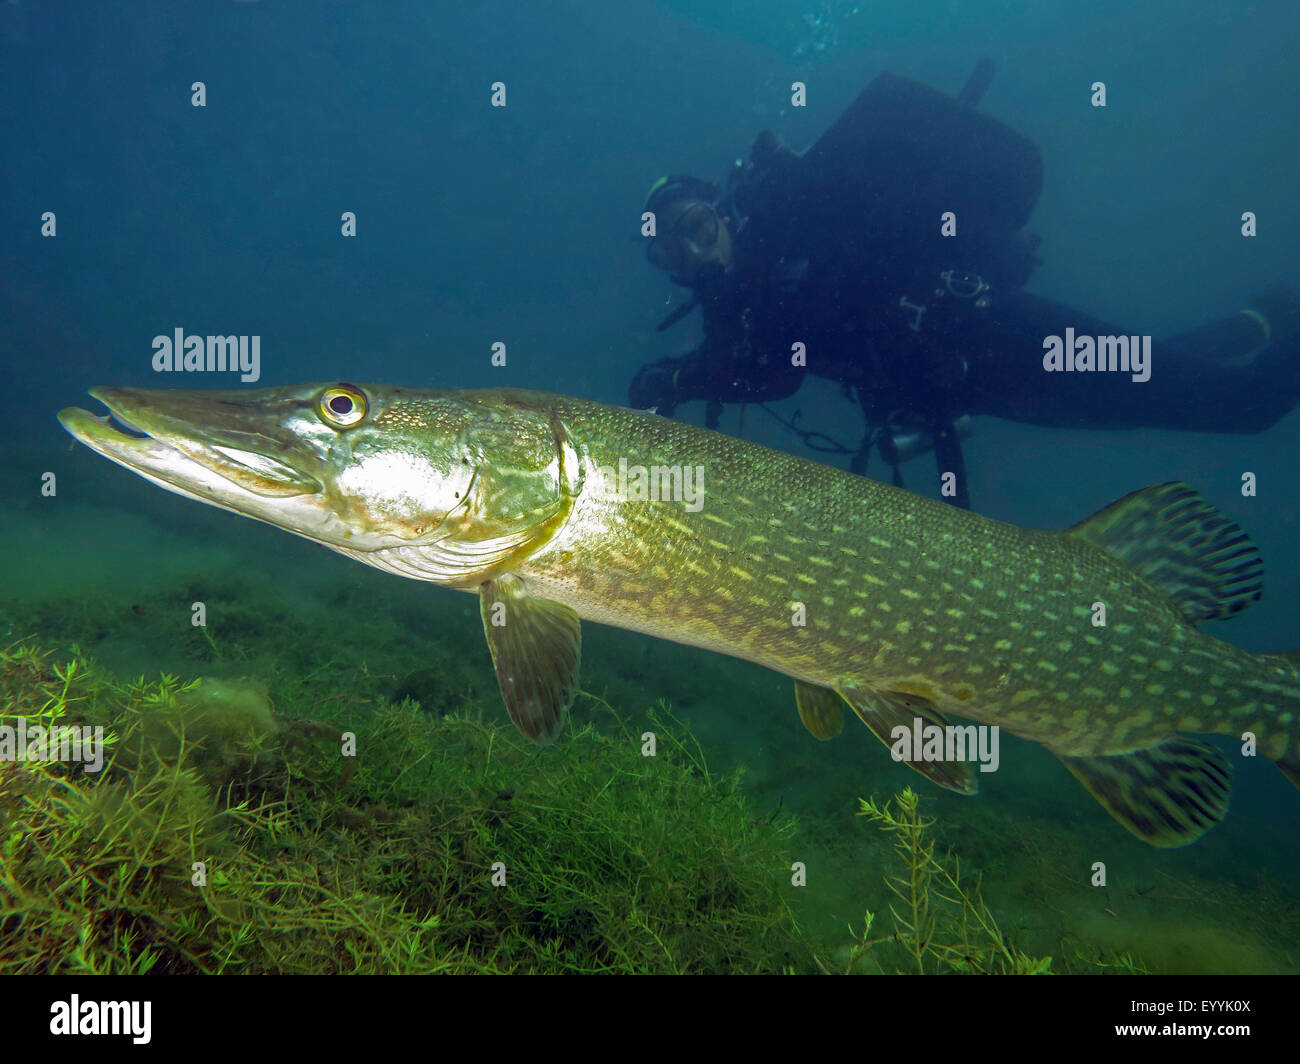 pike, northern pike (Esox lucius), diver watching a pike in a lake, Germany, North Rhine-Westphalia, Fuehlinger See Stock Photo